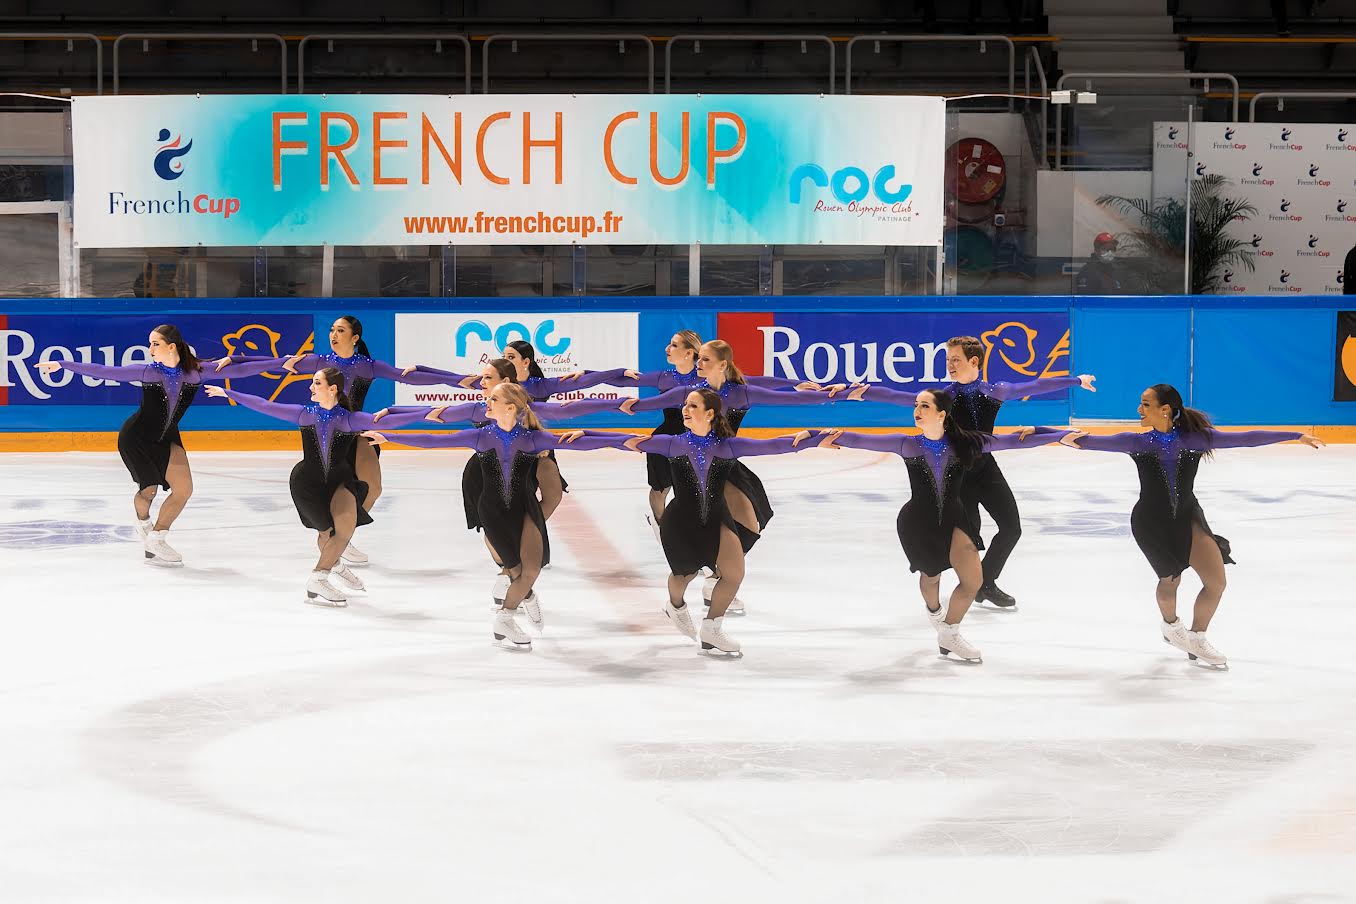 Synchronized Figure Skating Team skates on the ice at the French Cup